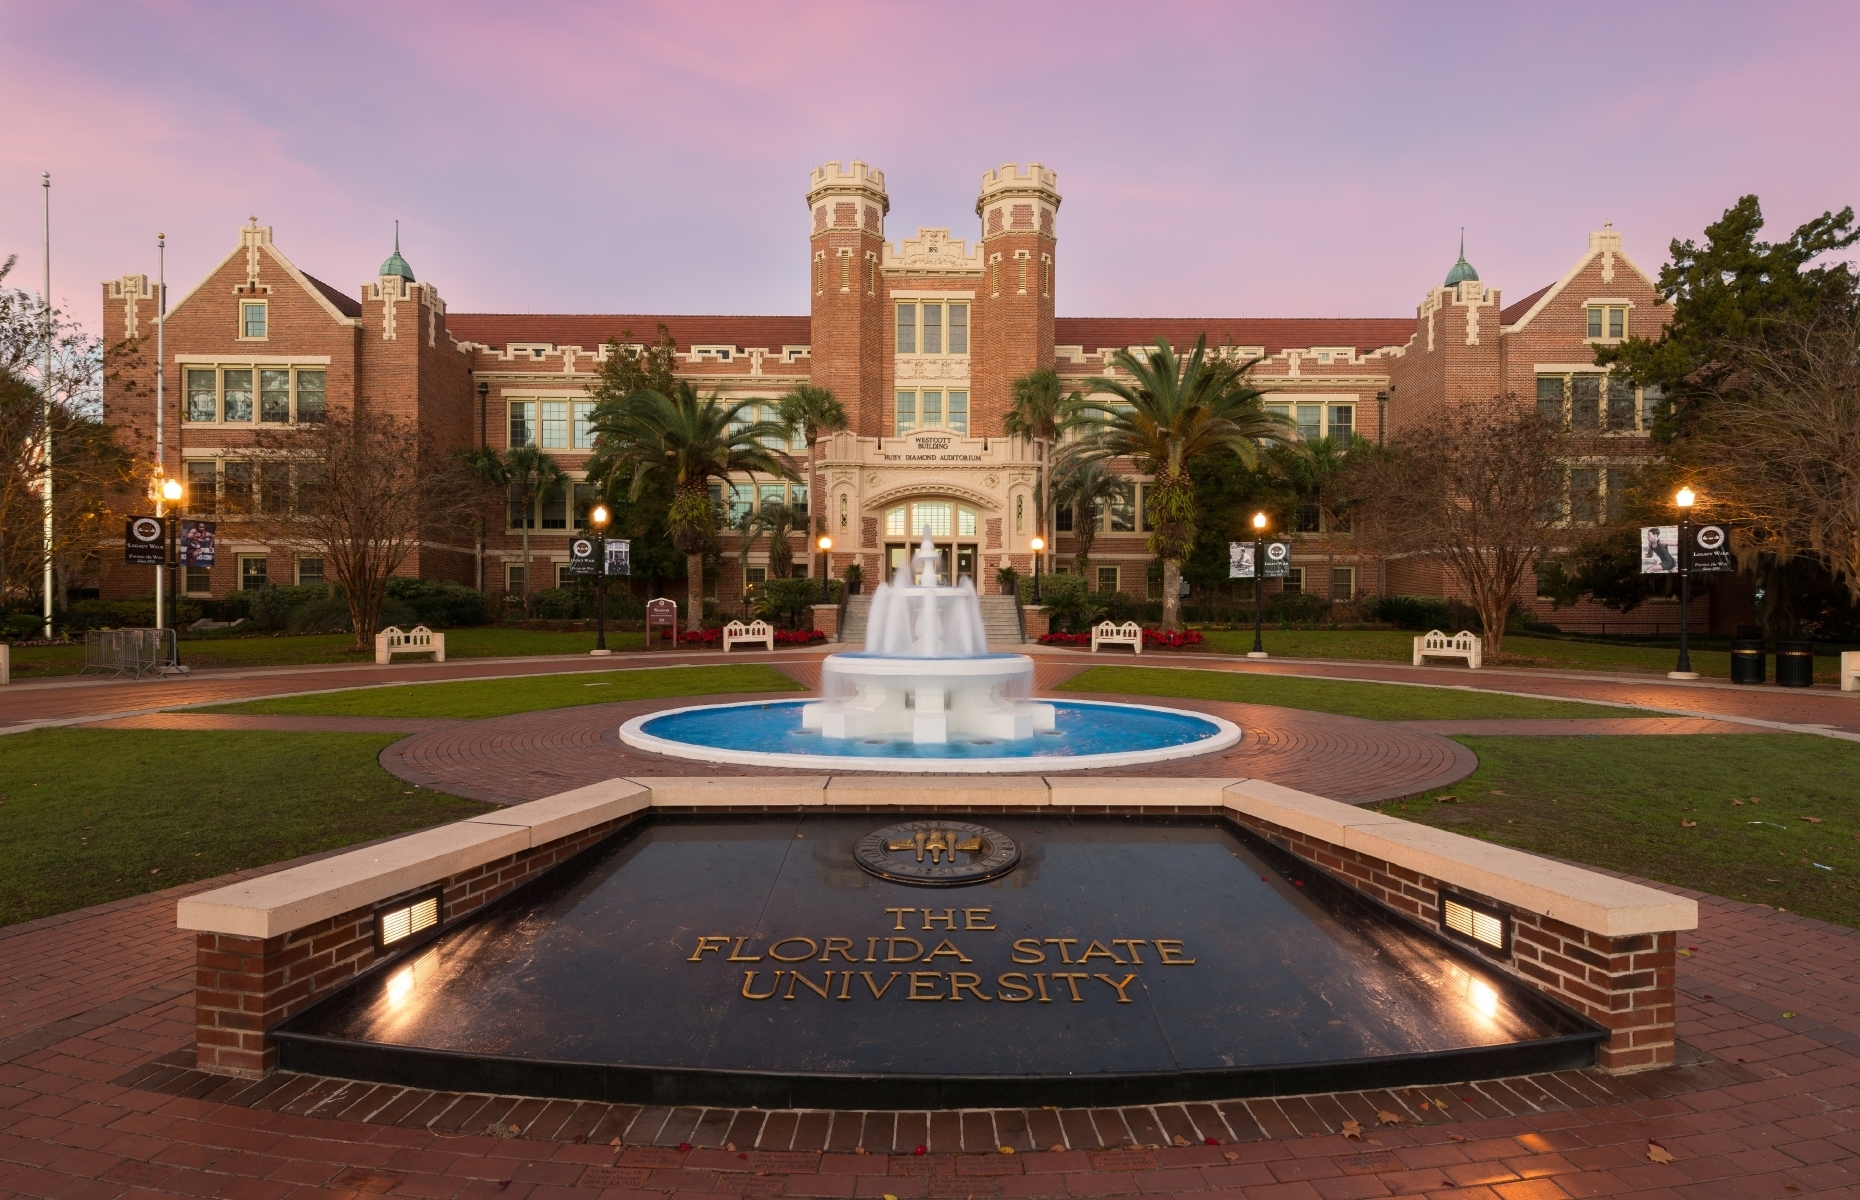 <p>The United States boasts some truly stunning college campuses. These 50 beautiful universities earn top marks for architecture, green space, the surrounding landscape, or all three.</p>